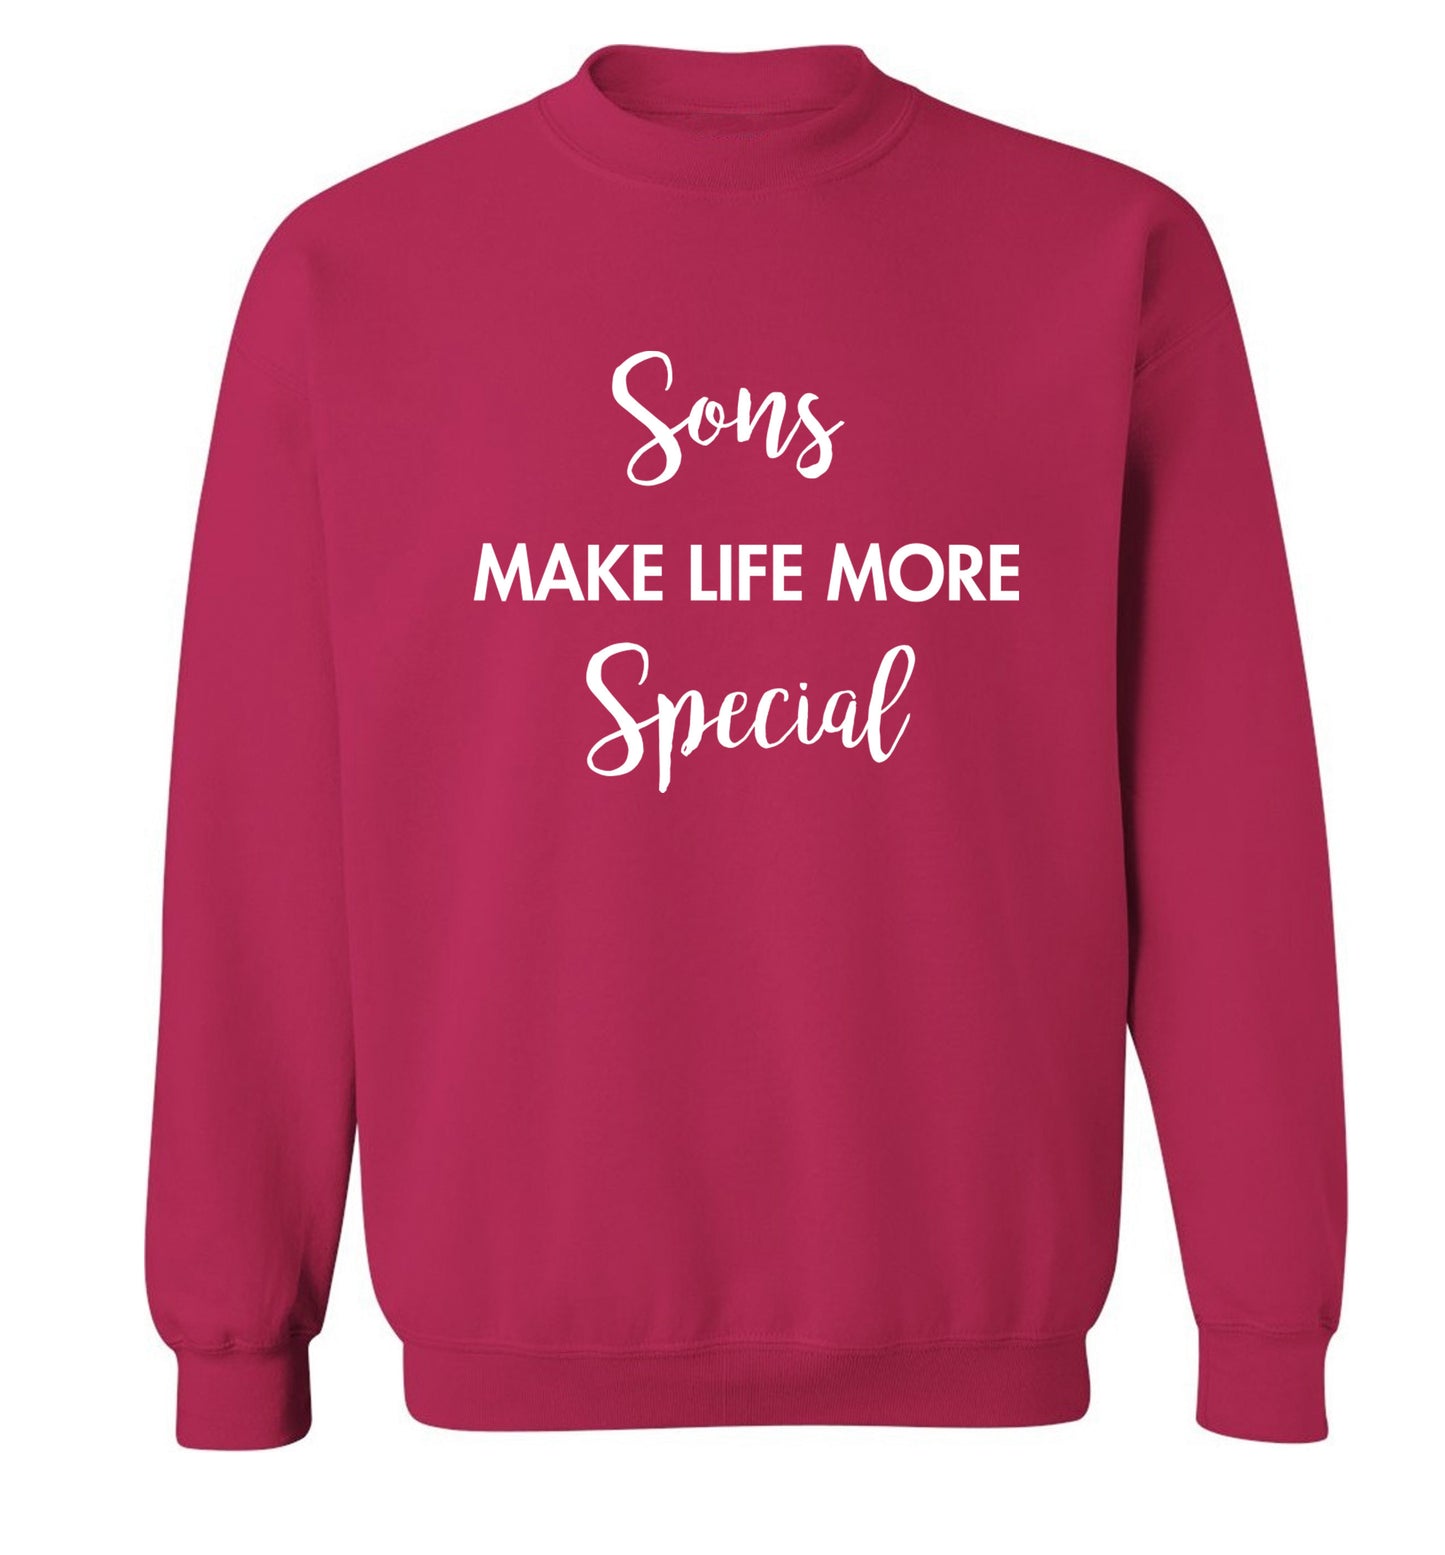 Daughters make life more special Adult's unisex pink Sweater 2XL